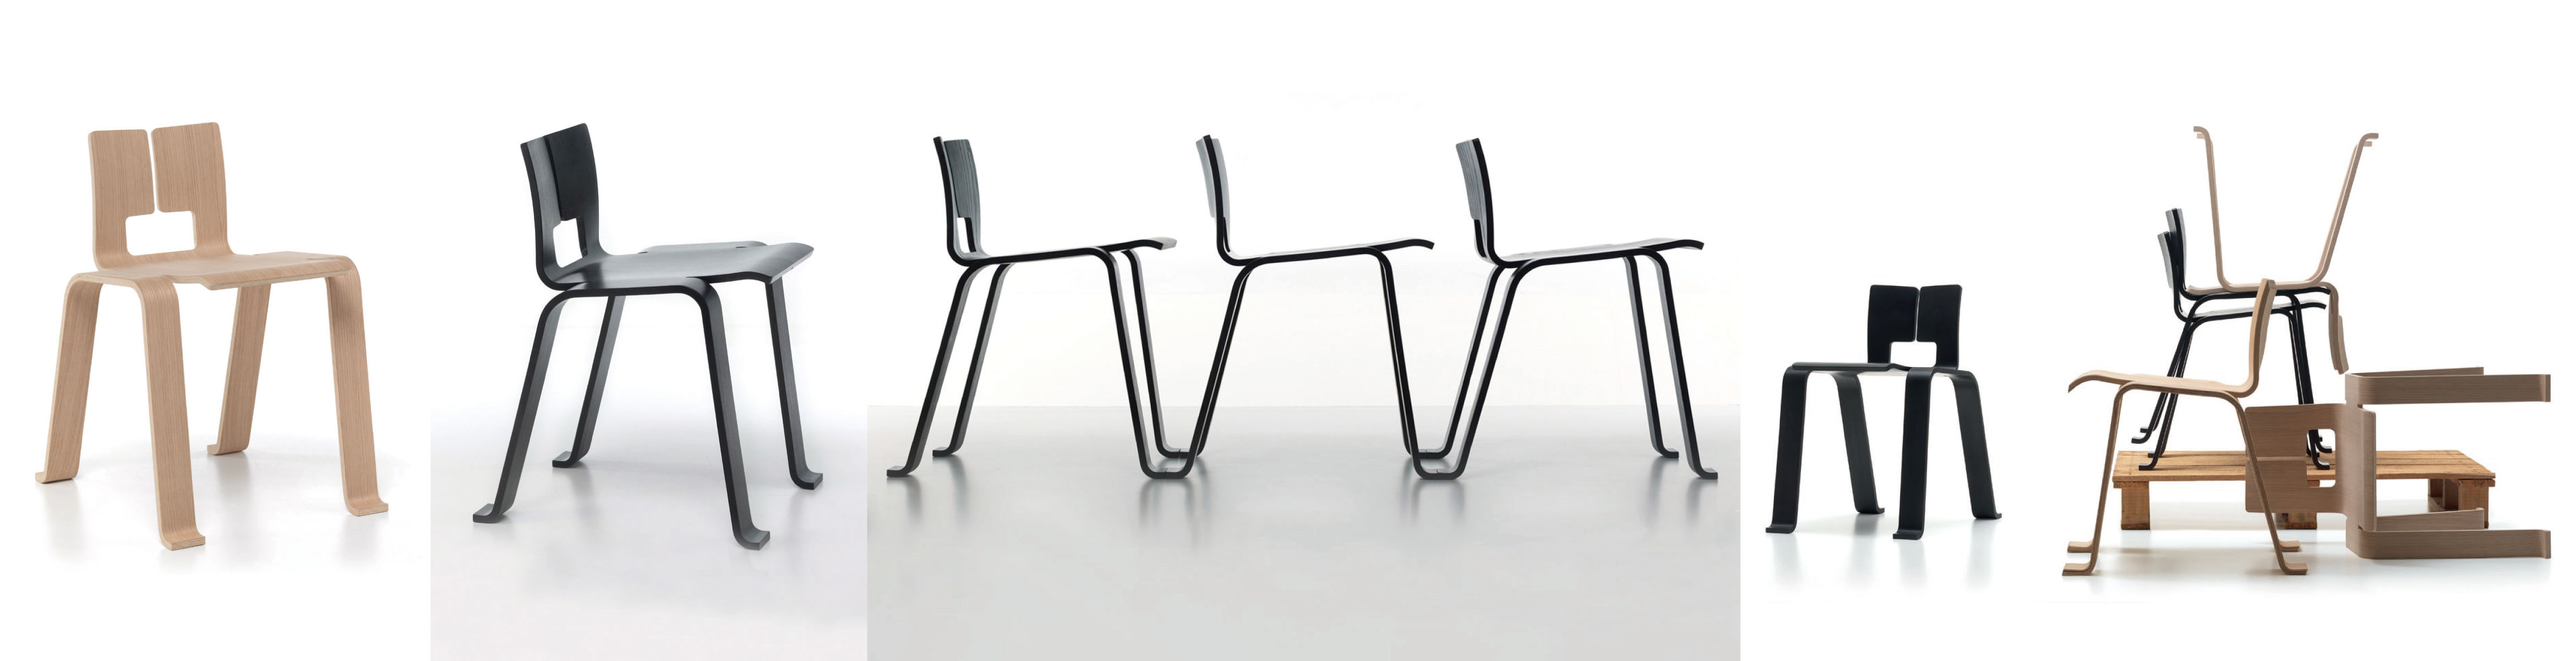 OMBRA TOKYO chair